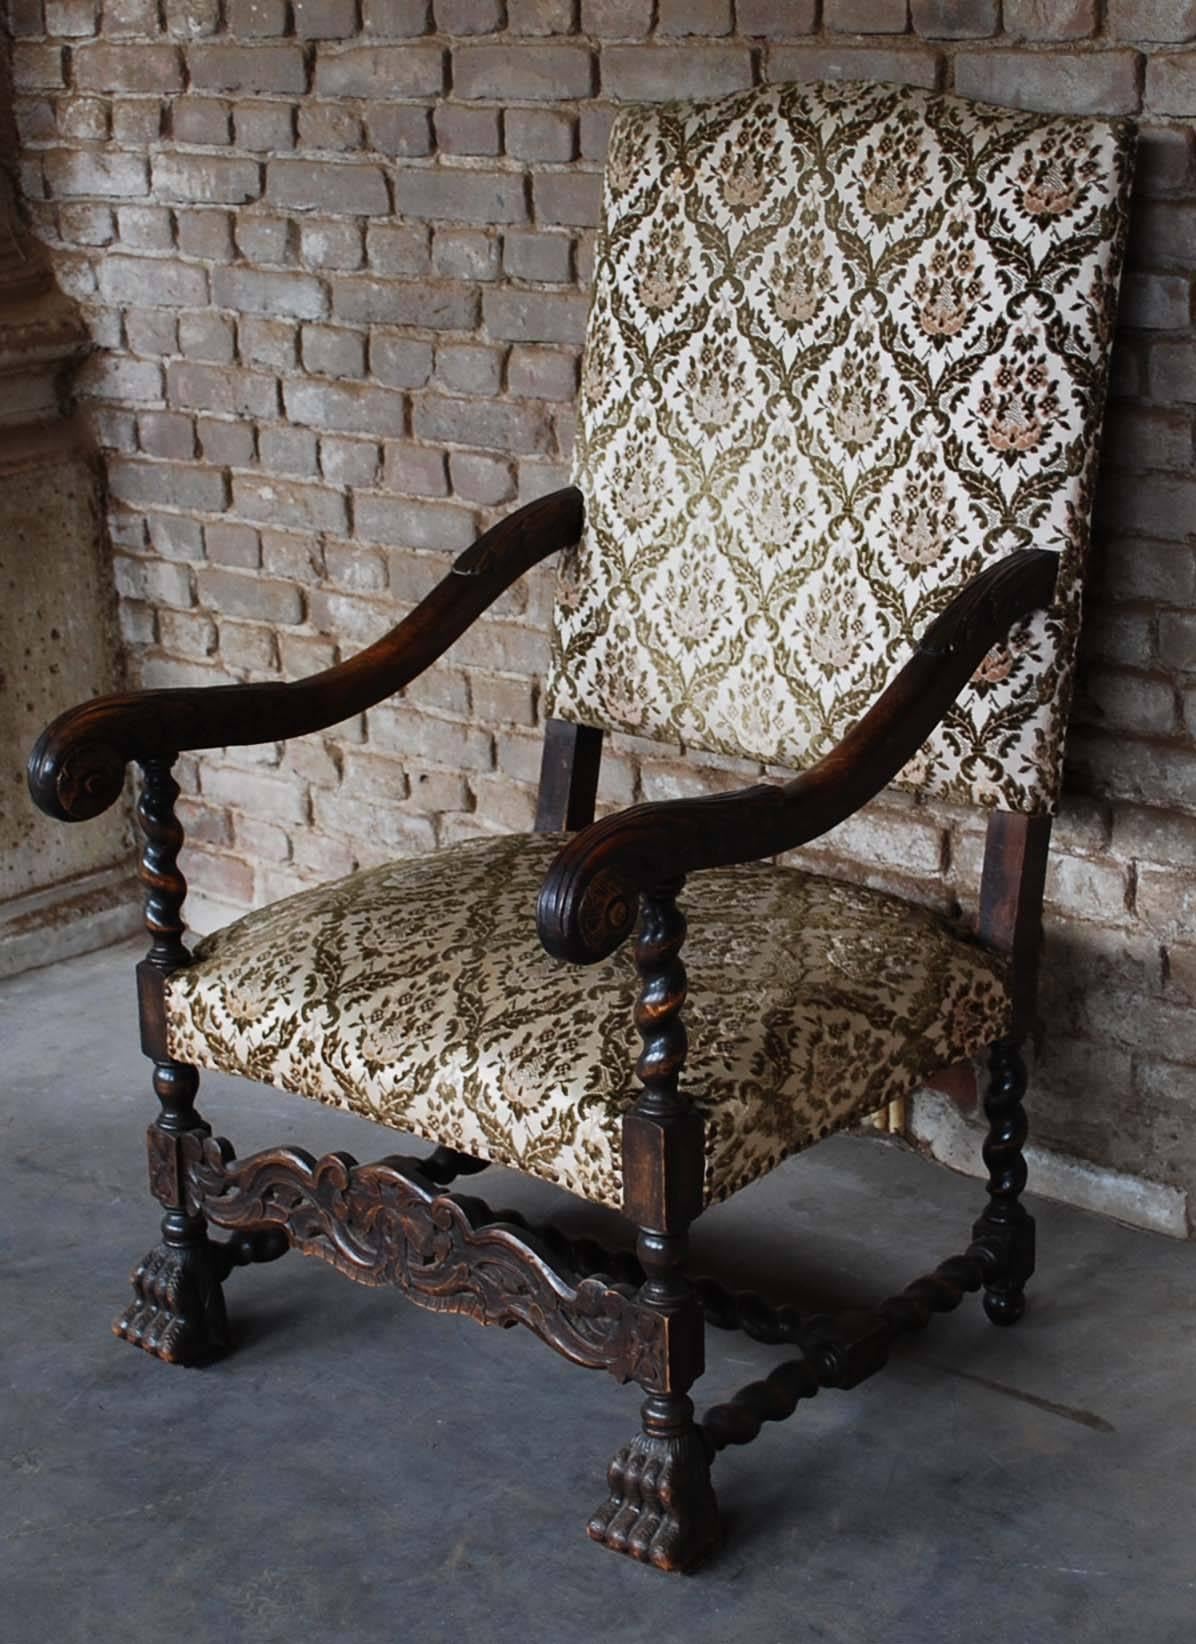 throne chairs for sale near me